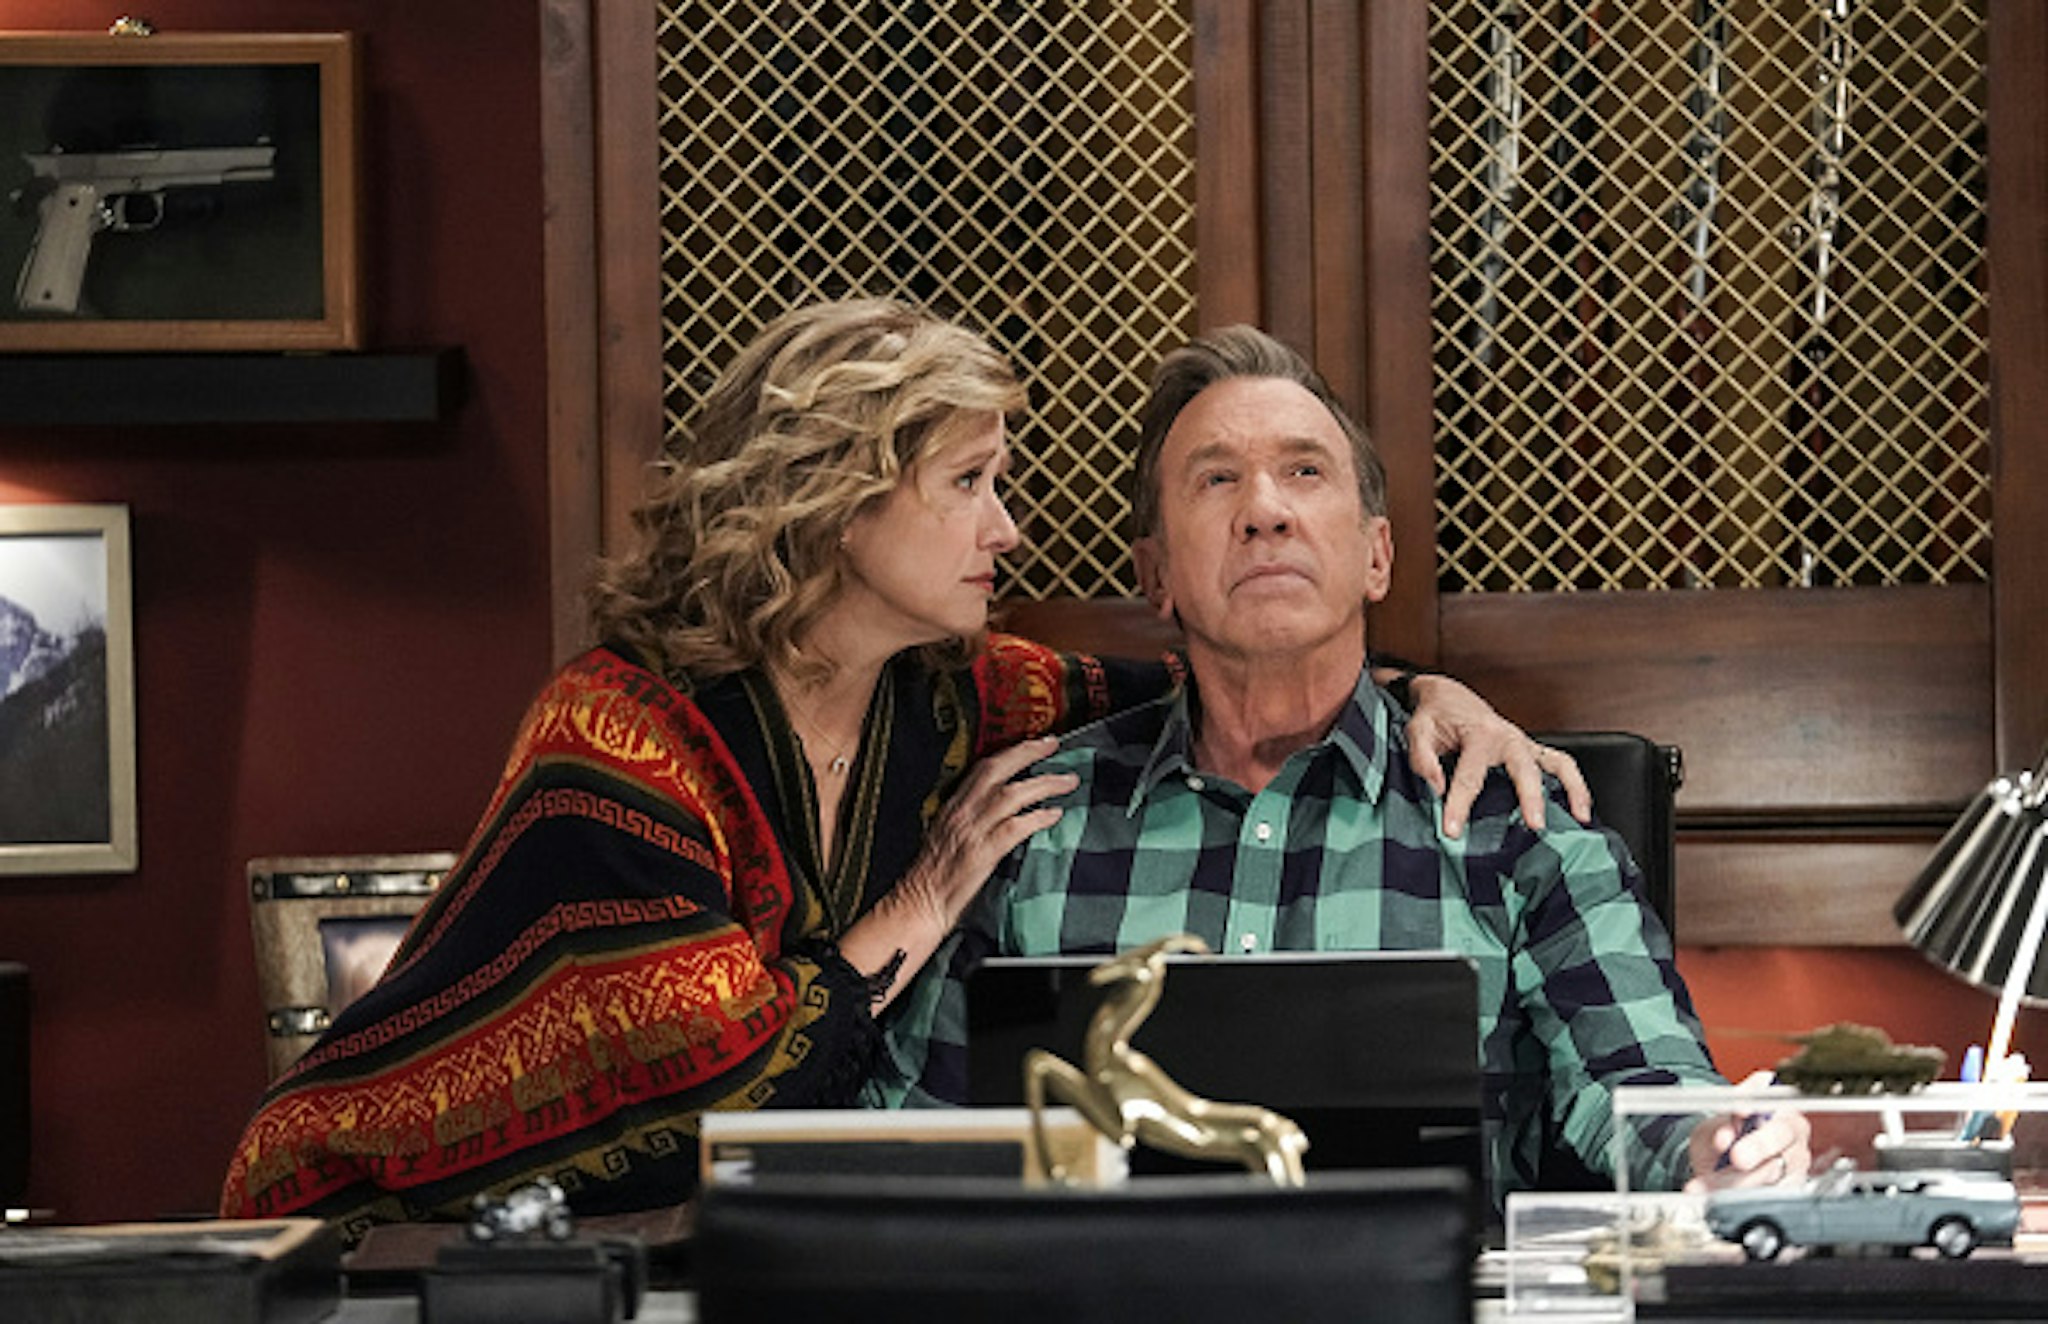 LAST MAN STANDING: L-R: Nancy Travis and Tim Allen in the "Grill in the Mist" episode of LAST MAN STANDING airing Thursday, Feb. 25 (9:30-10:00 PM ET/PT) on FOX.